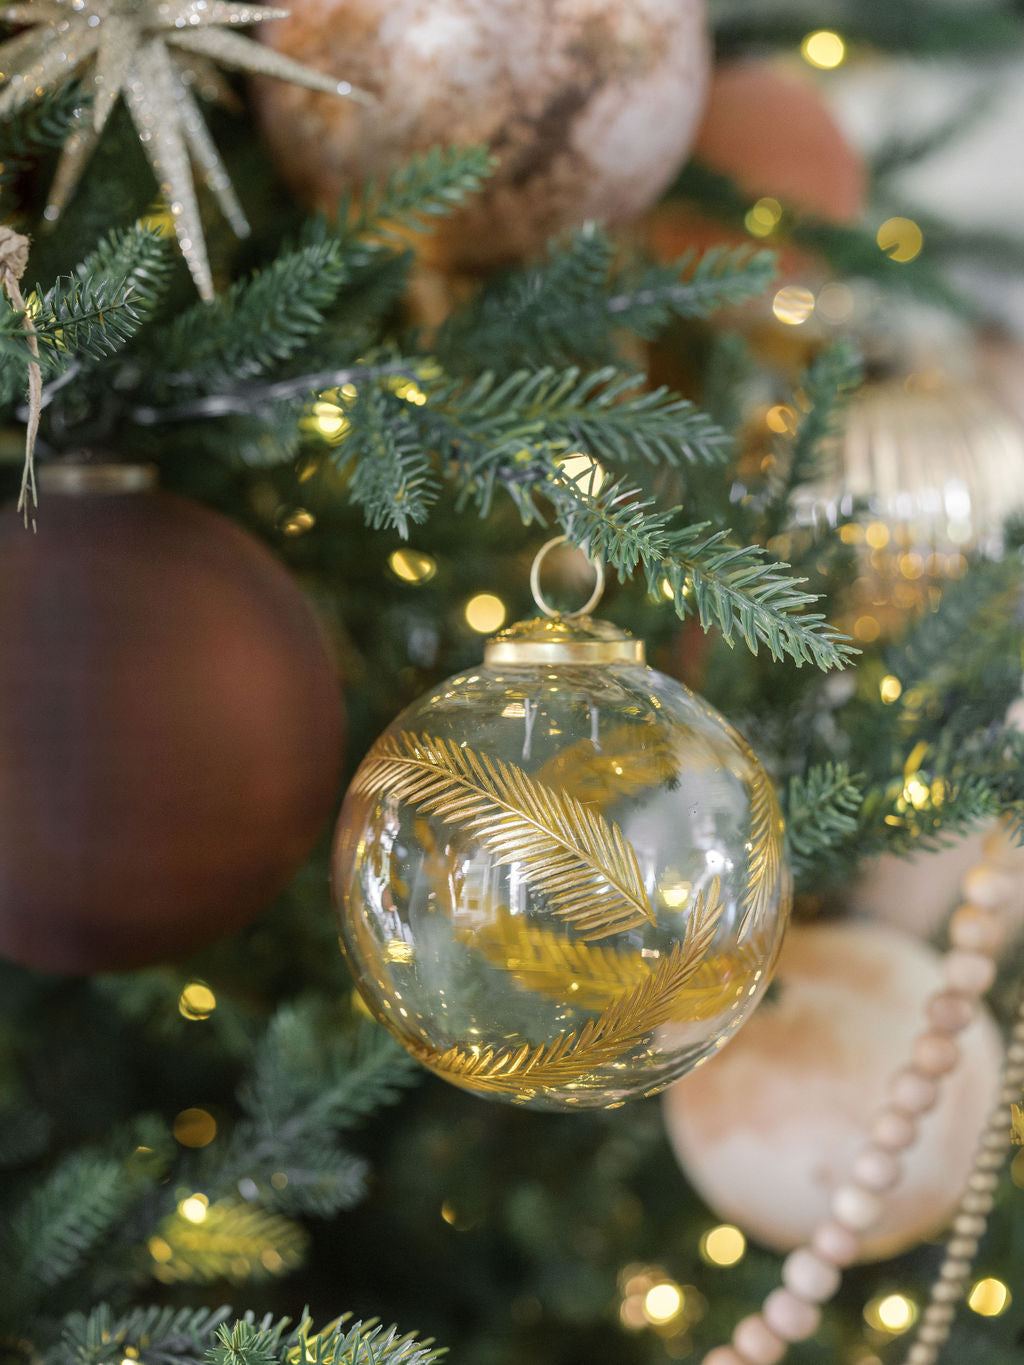 A beautiful picture of the Hand Blown Glass Gold Etched Ornament on tree